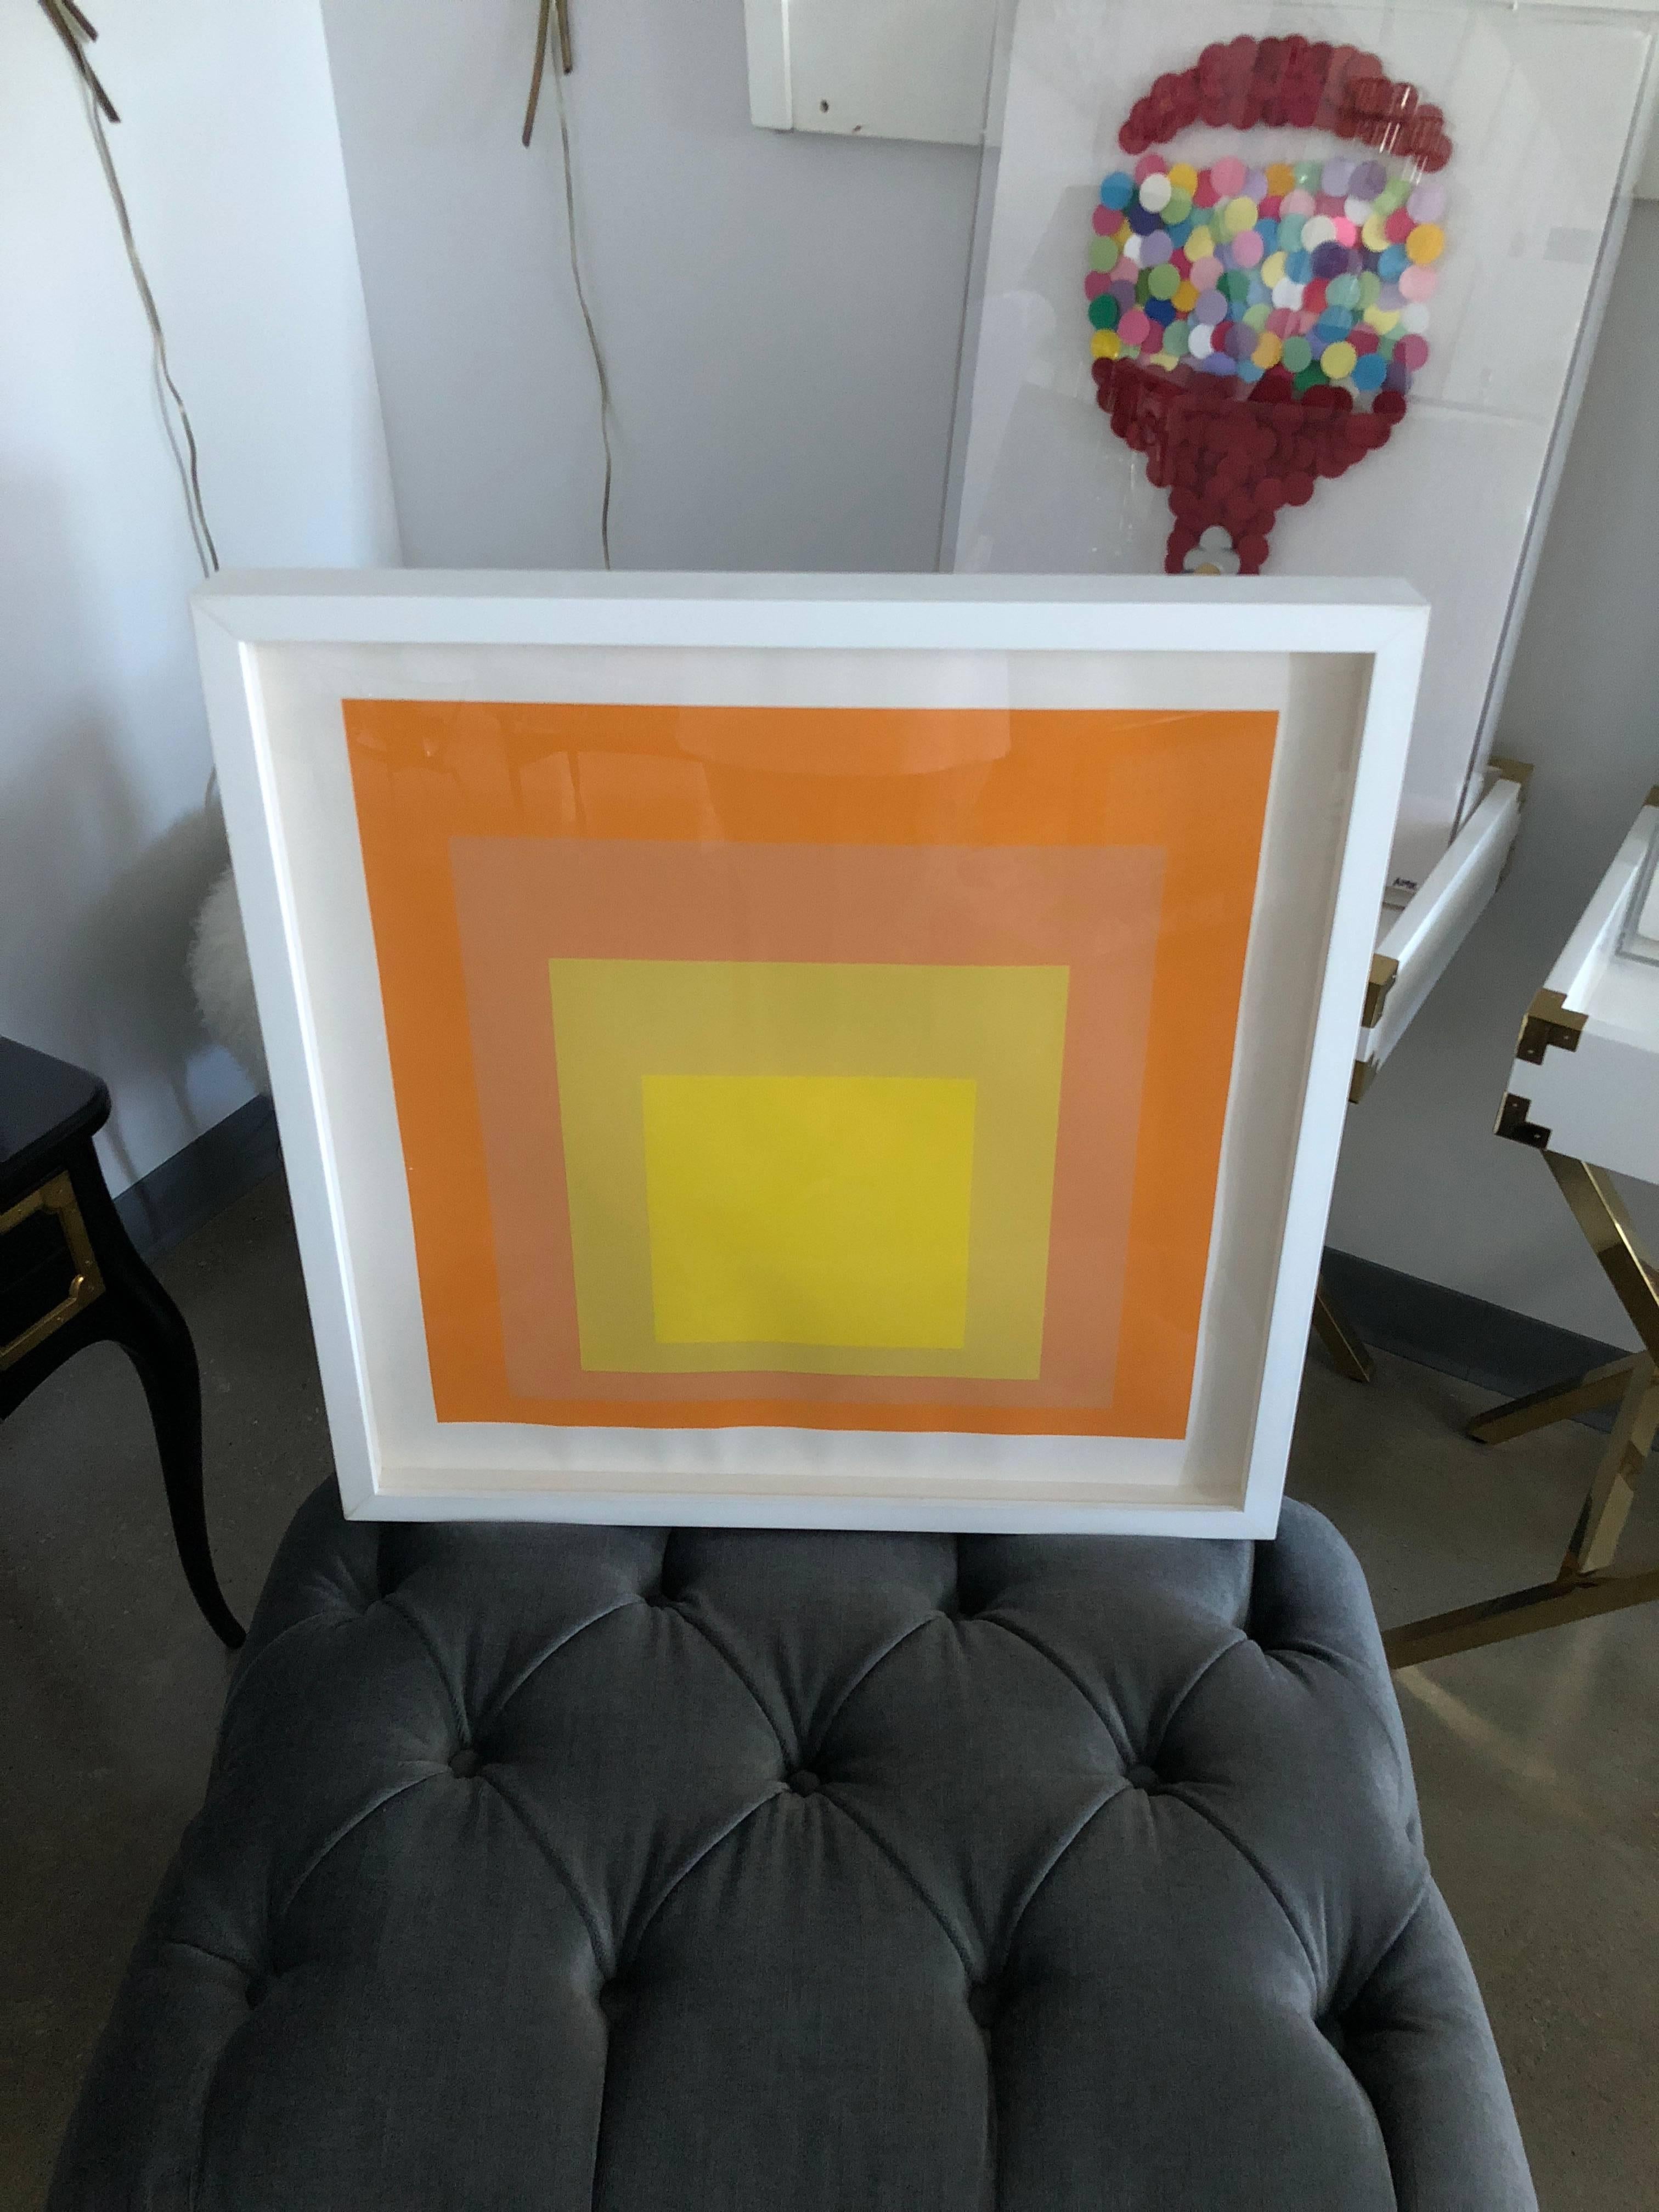 Offered is a framed in white Mid-Century Modern abstract silkscreen by Josef Albers (1888-1976) entitled 